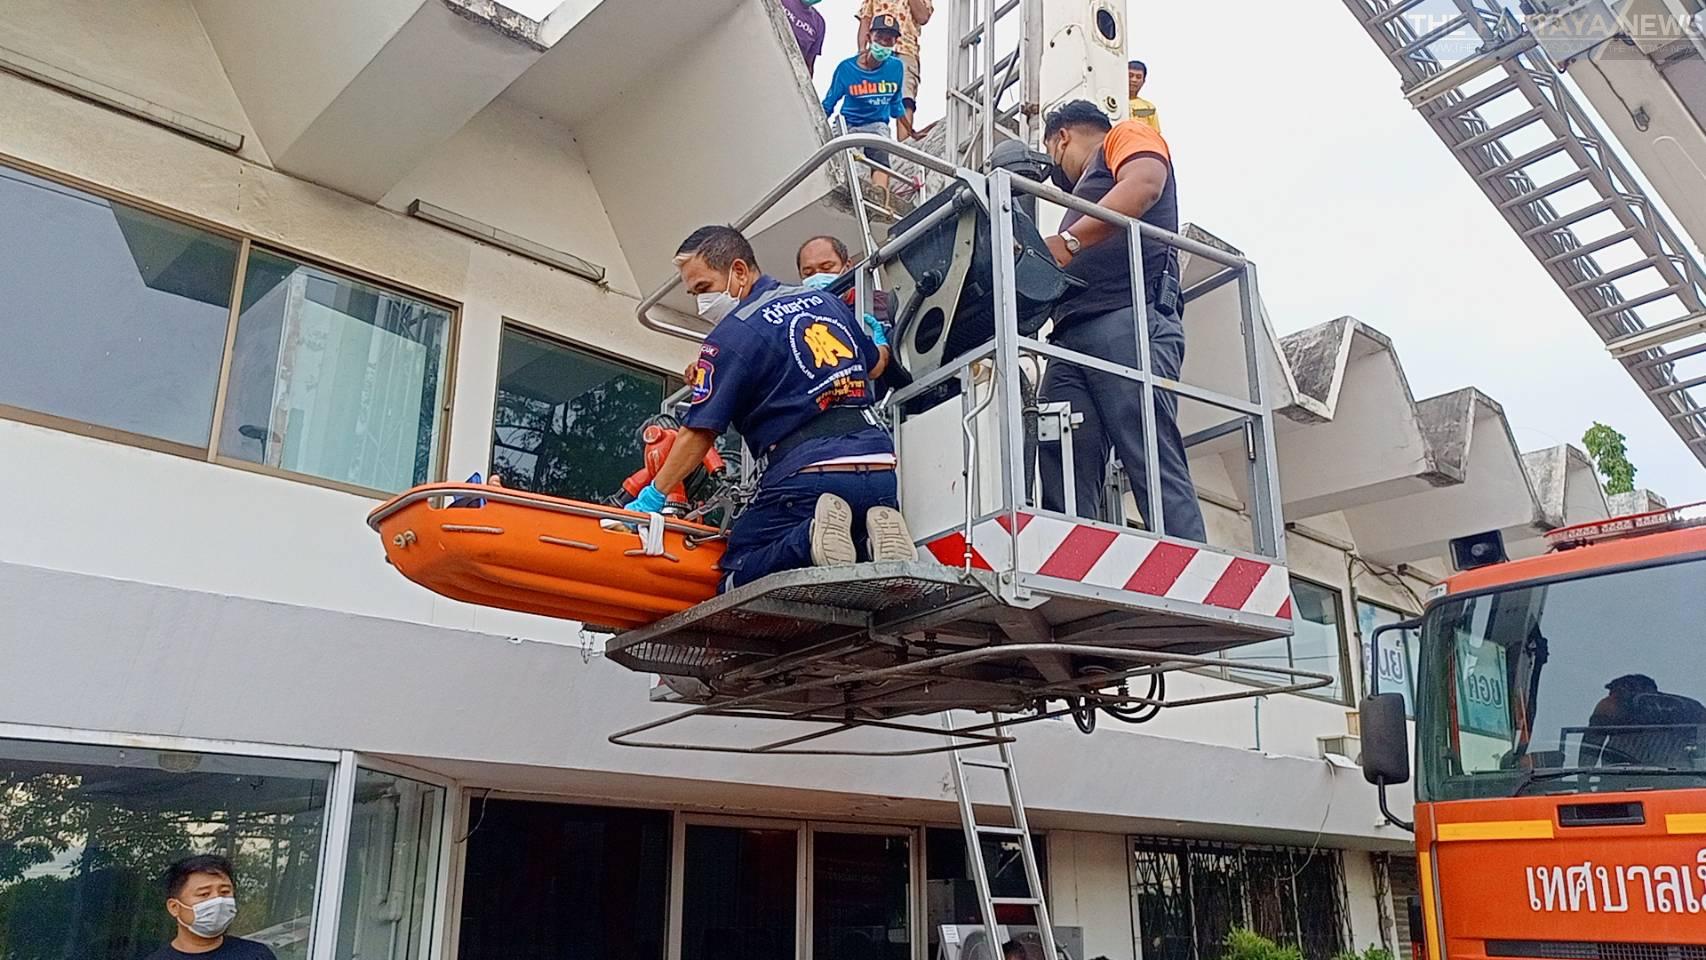 Video: Two electricians injured after falling off a radio tower onto a gym roof this morning in Sri Racha